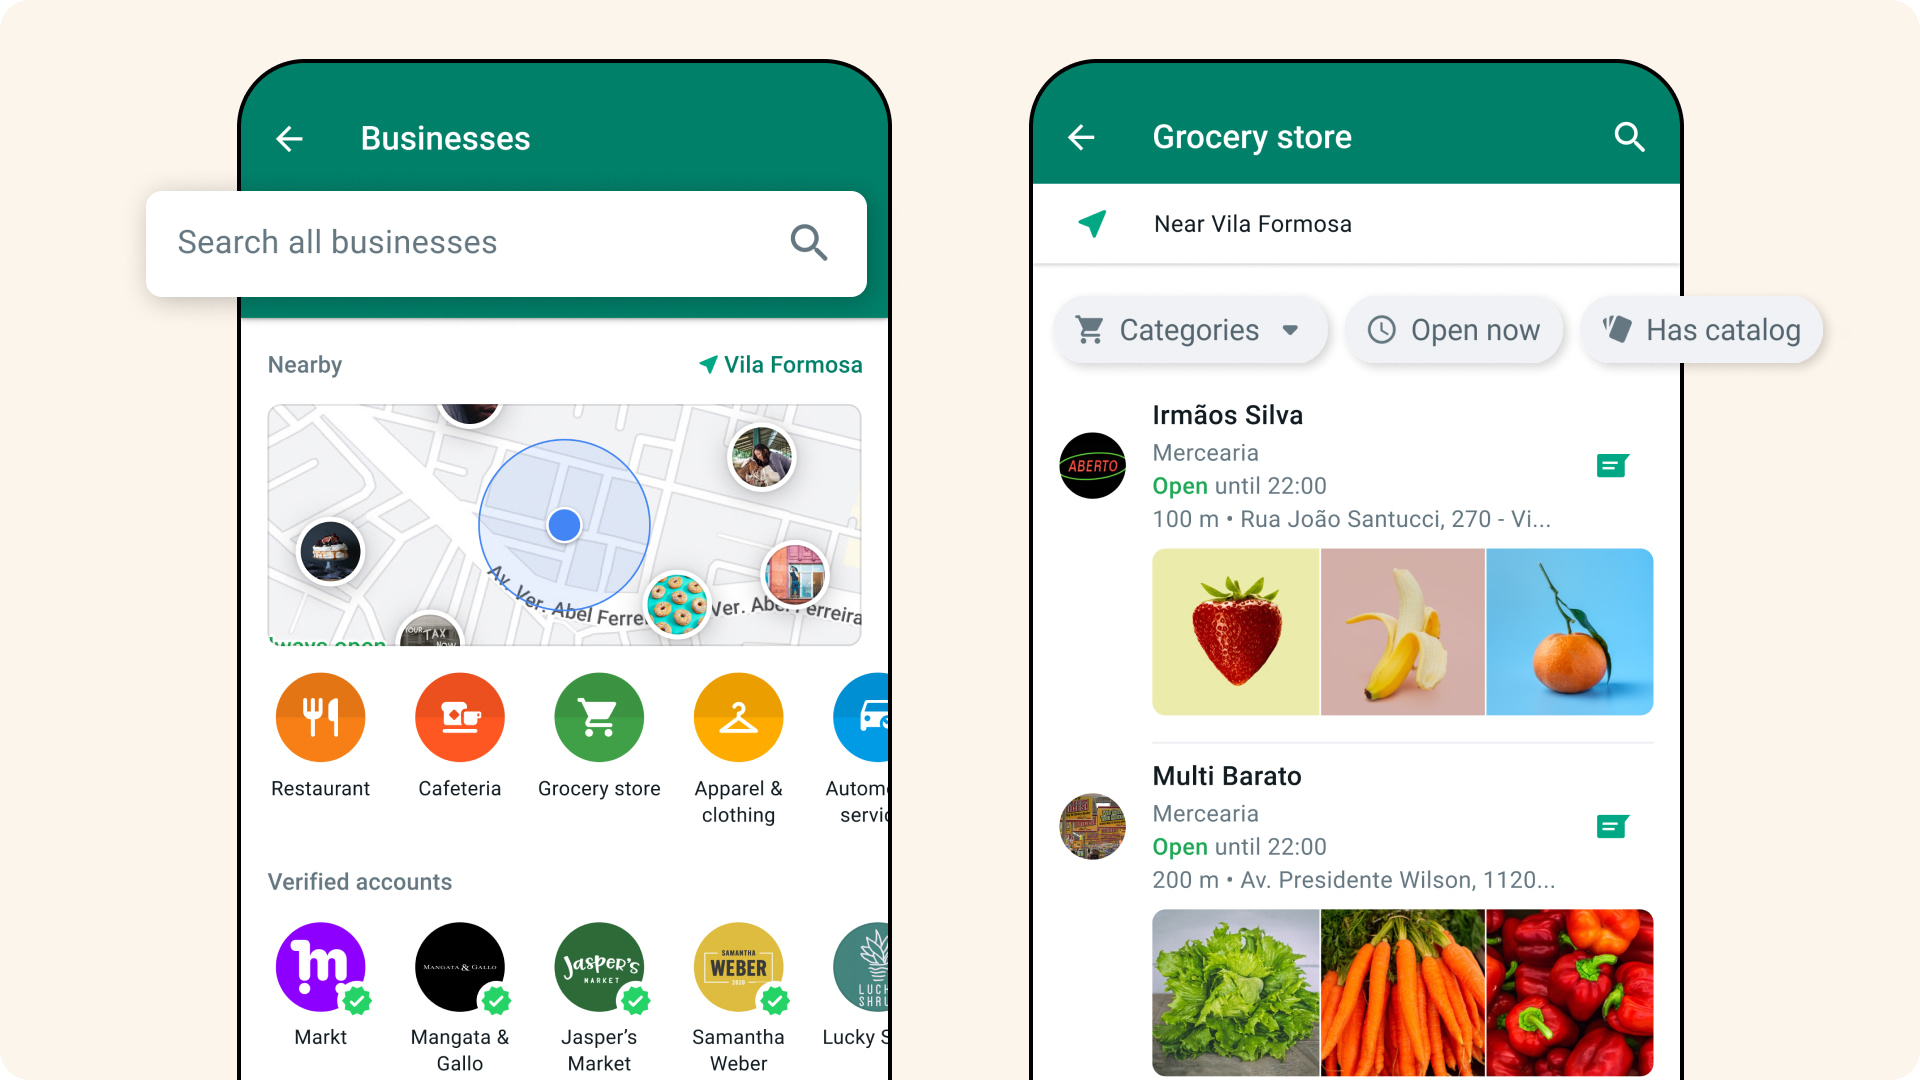 WhatsApp, enabling users to find businesses, correspond with them, and buy from them through conversations only.